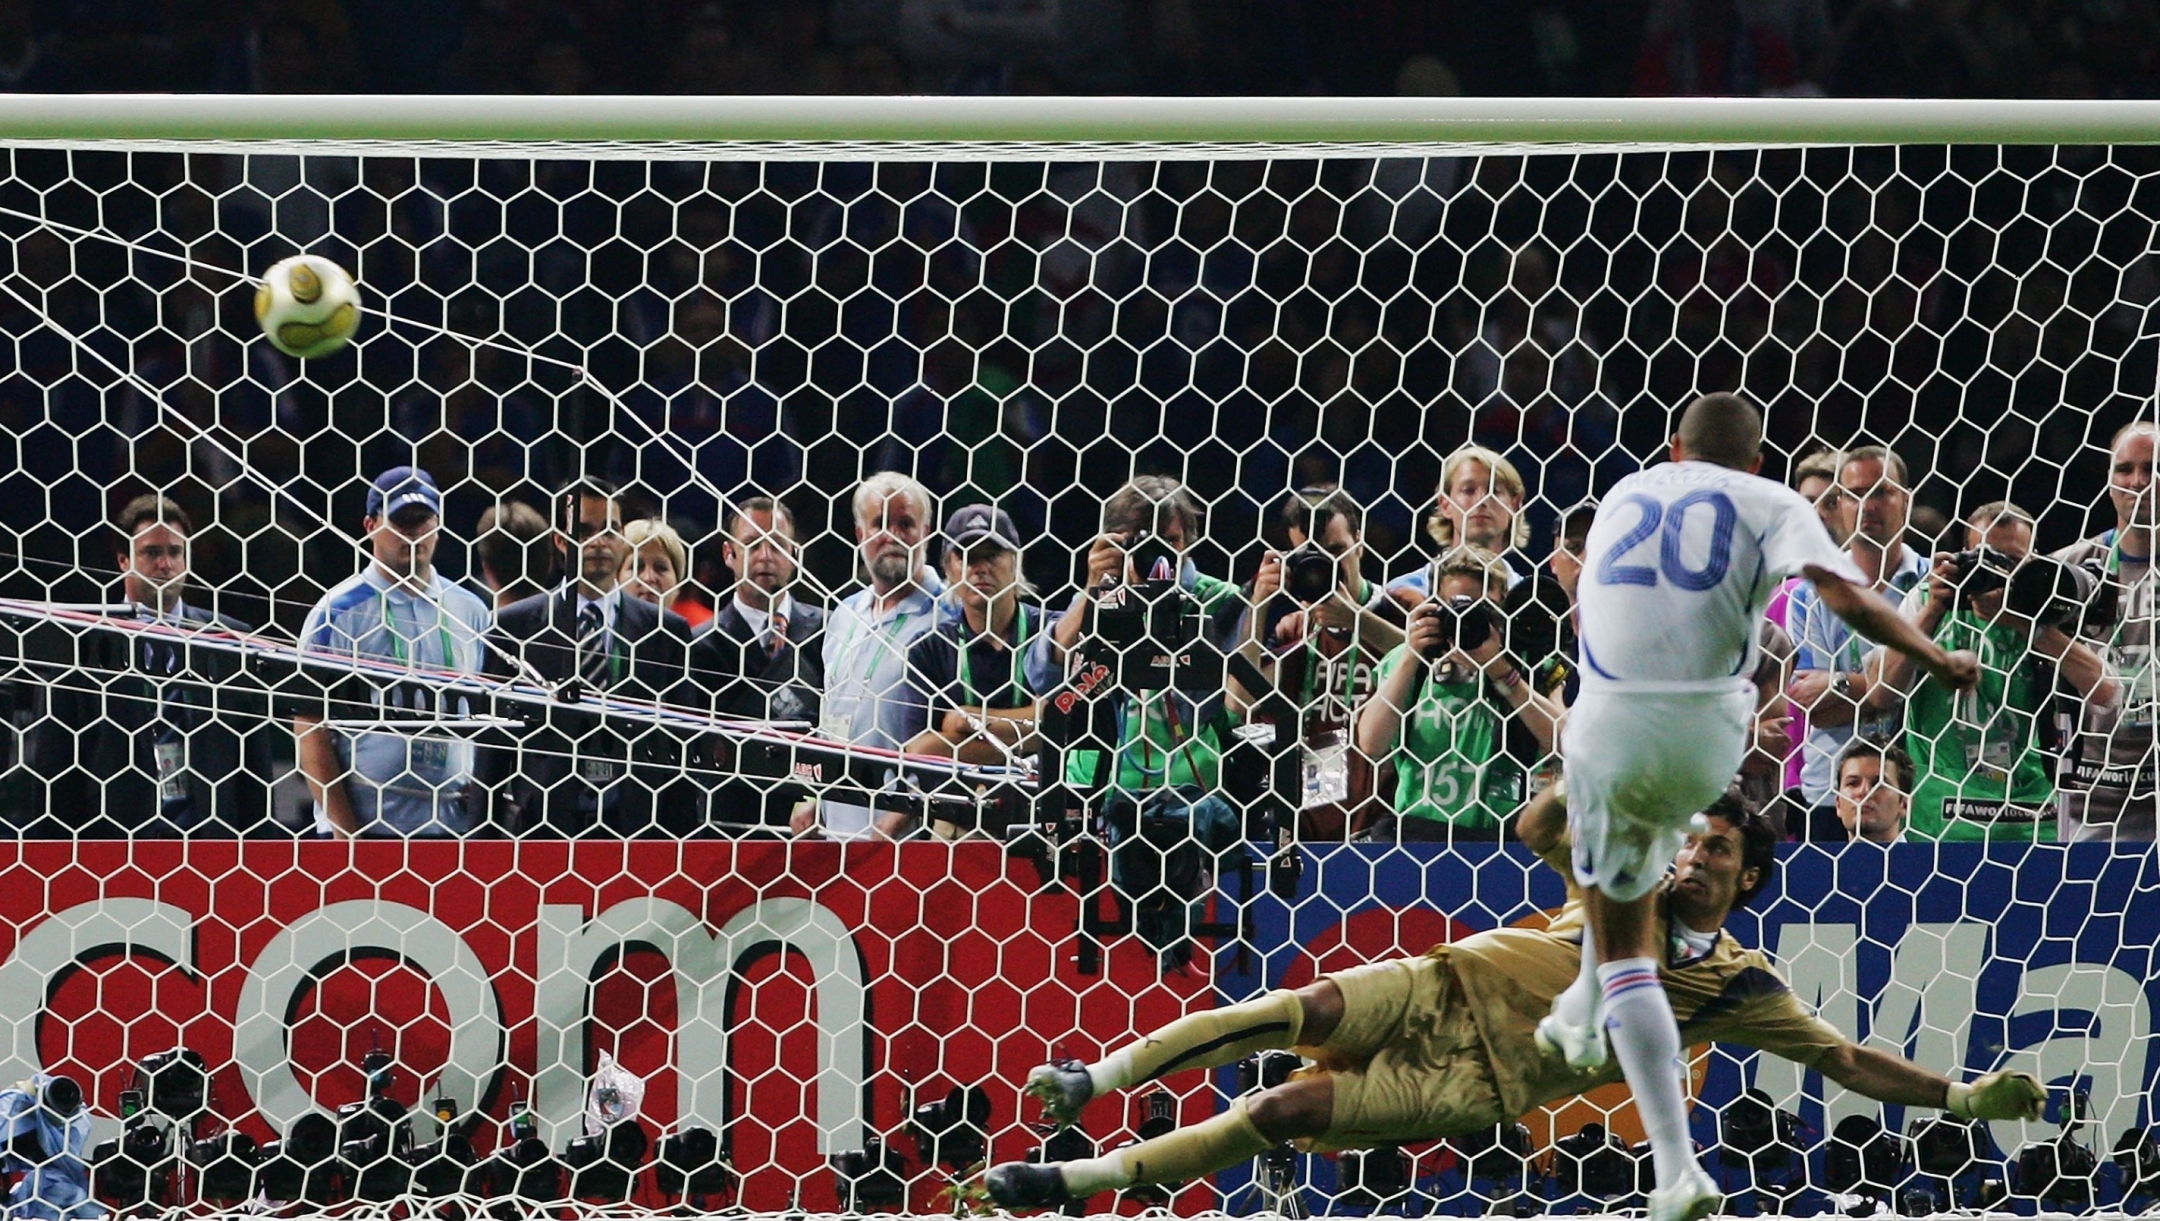 BERLIN - JULY 9:  David Trezeguet of France misses his penalty kick during a penalty shootout at the end of the FIFA World Cup Germany 2006 Final match between Italy and France at the Olympic Stadium on July 9, 2006 in Berlin, Germany.  (Photo by Alex Livesey/Getty Images)